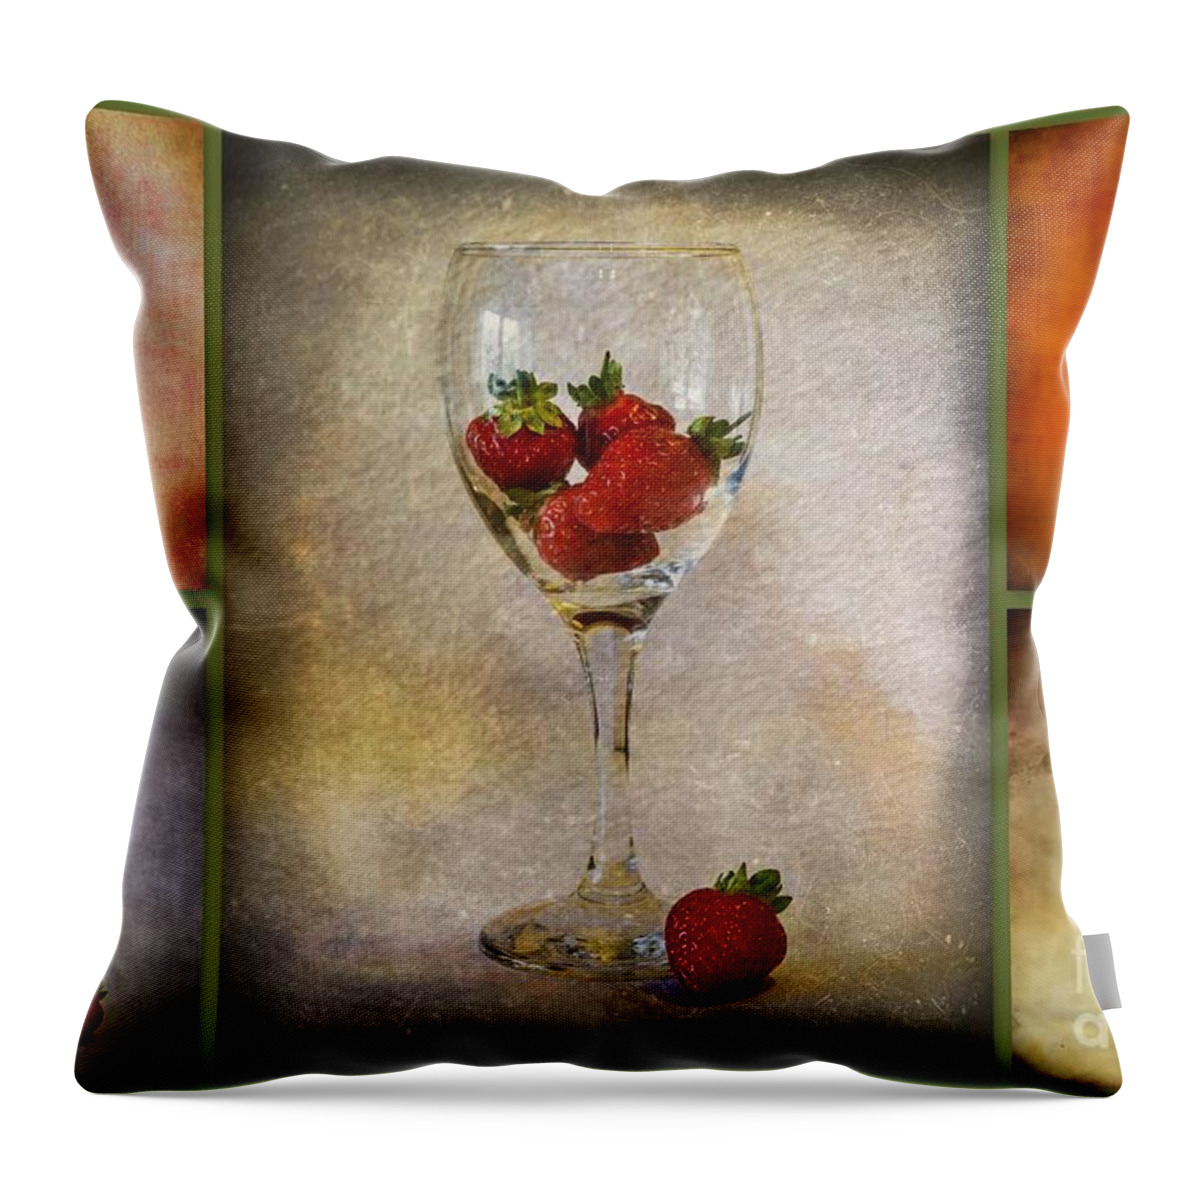 Strawberries Throw Pillow featuring the photograph Strawberry Still Life Collage by Sandra Cockayne ADPS